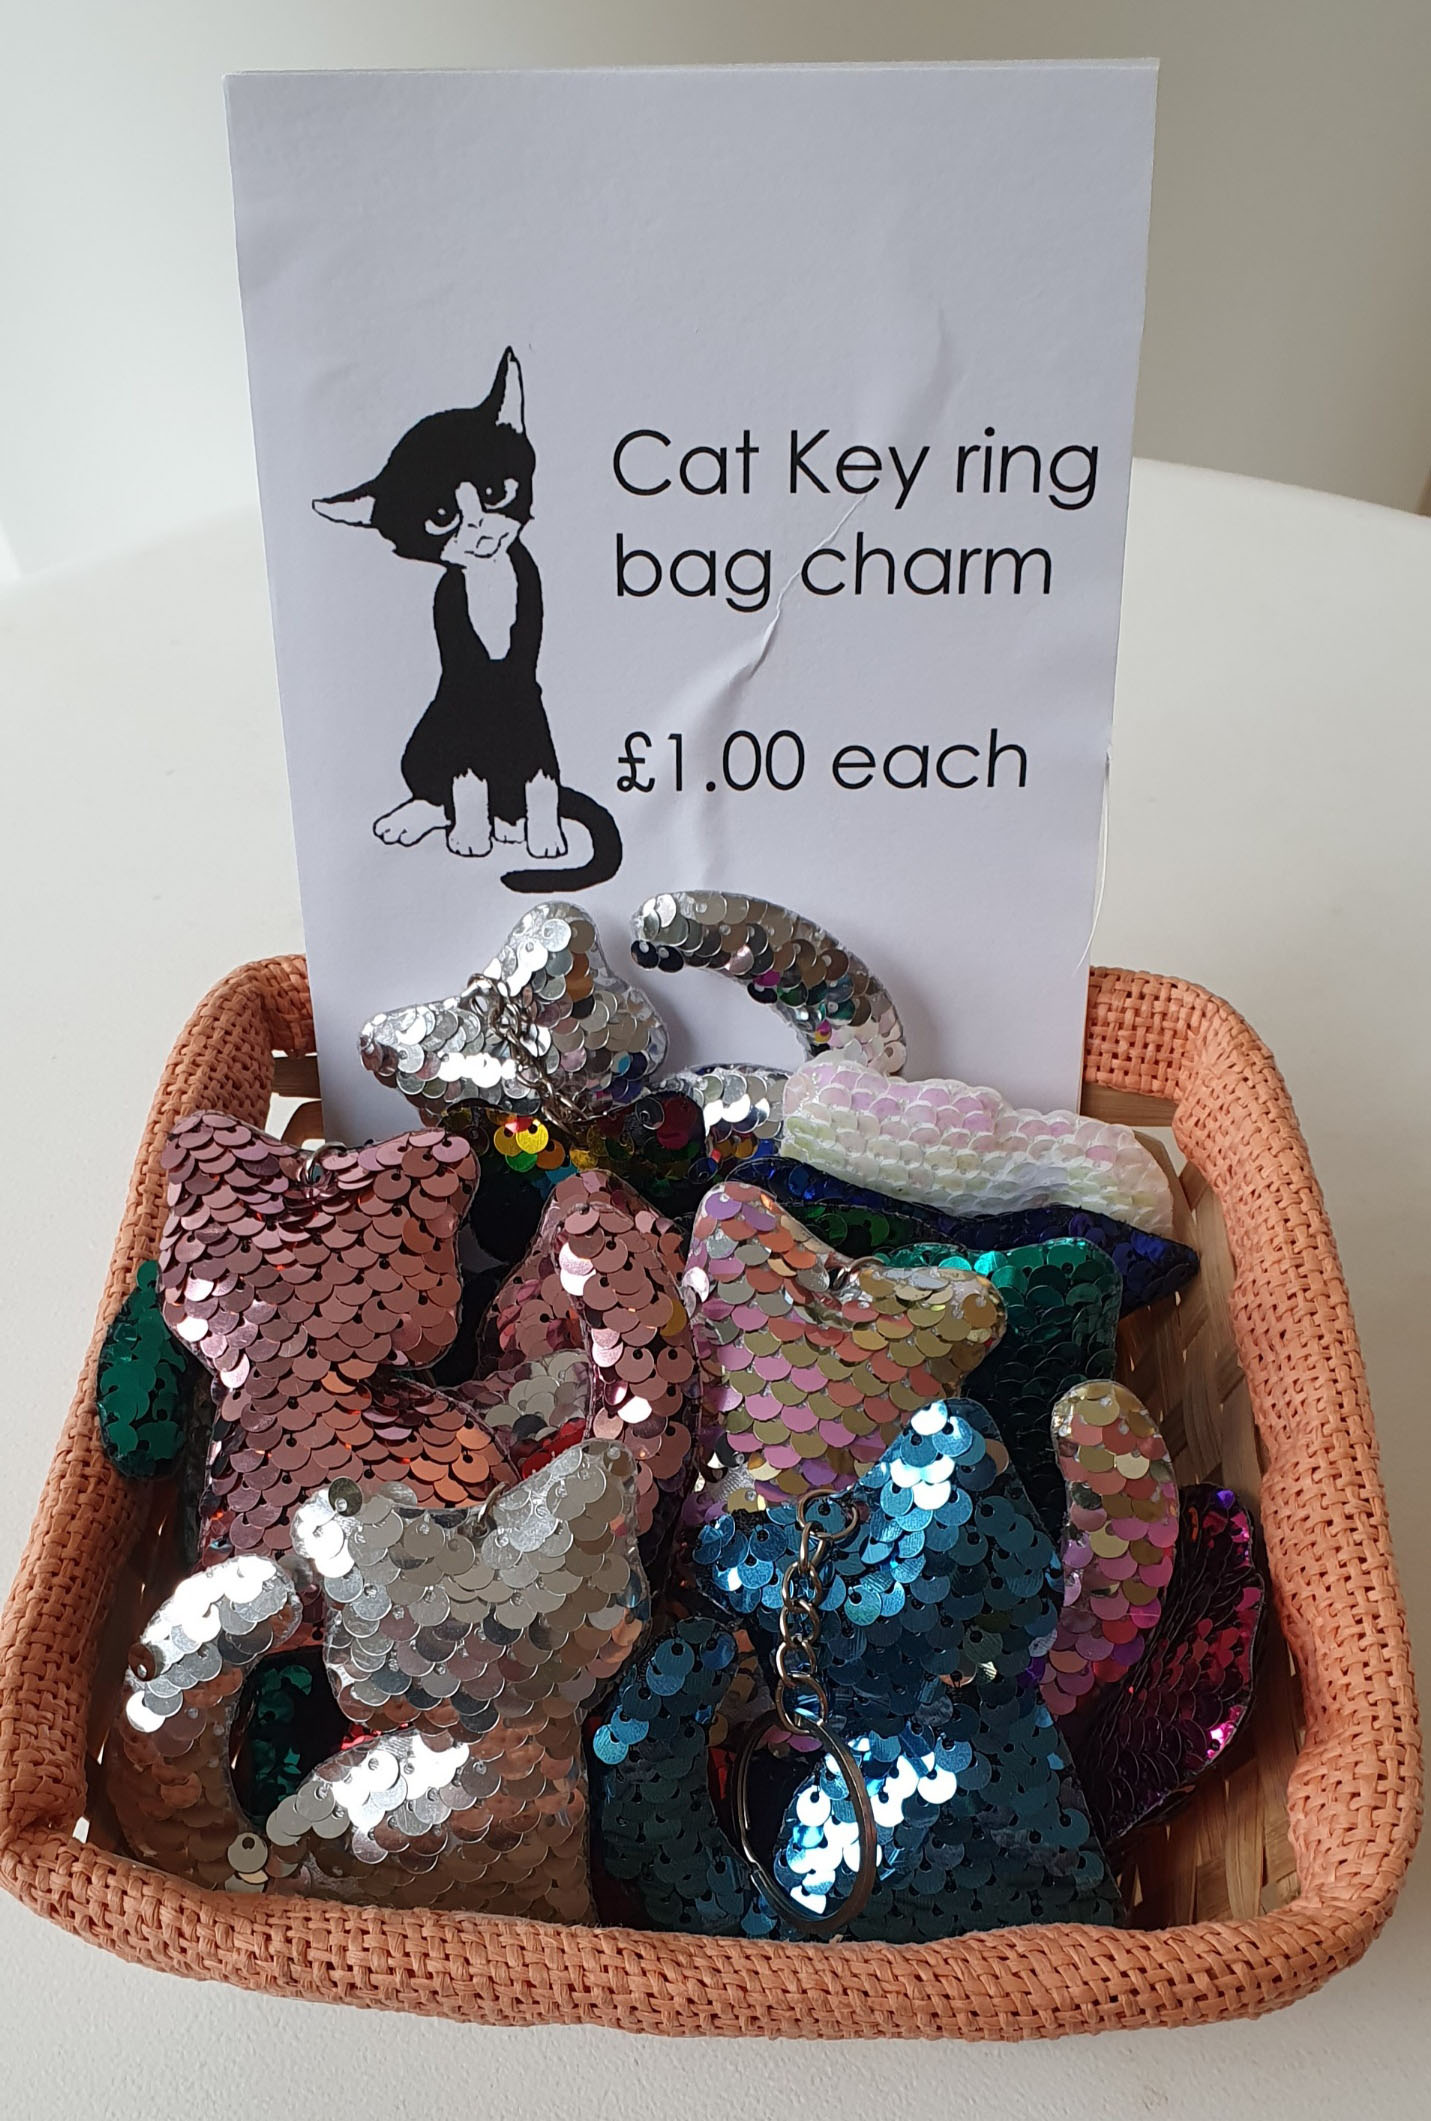 Cat Call charity raising money for cats in need